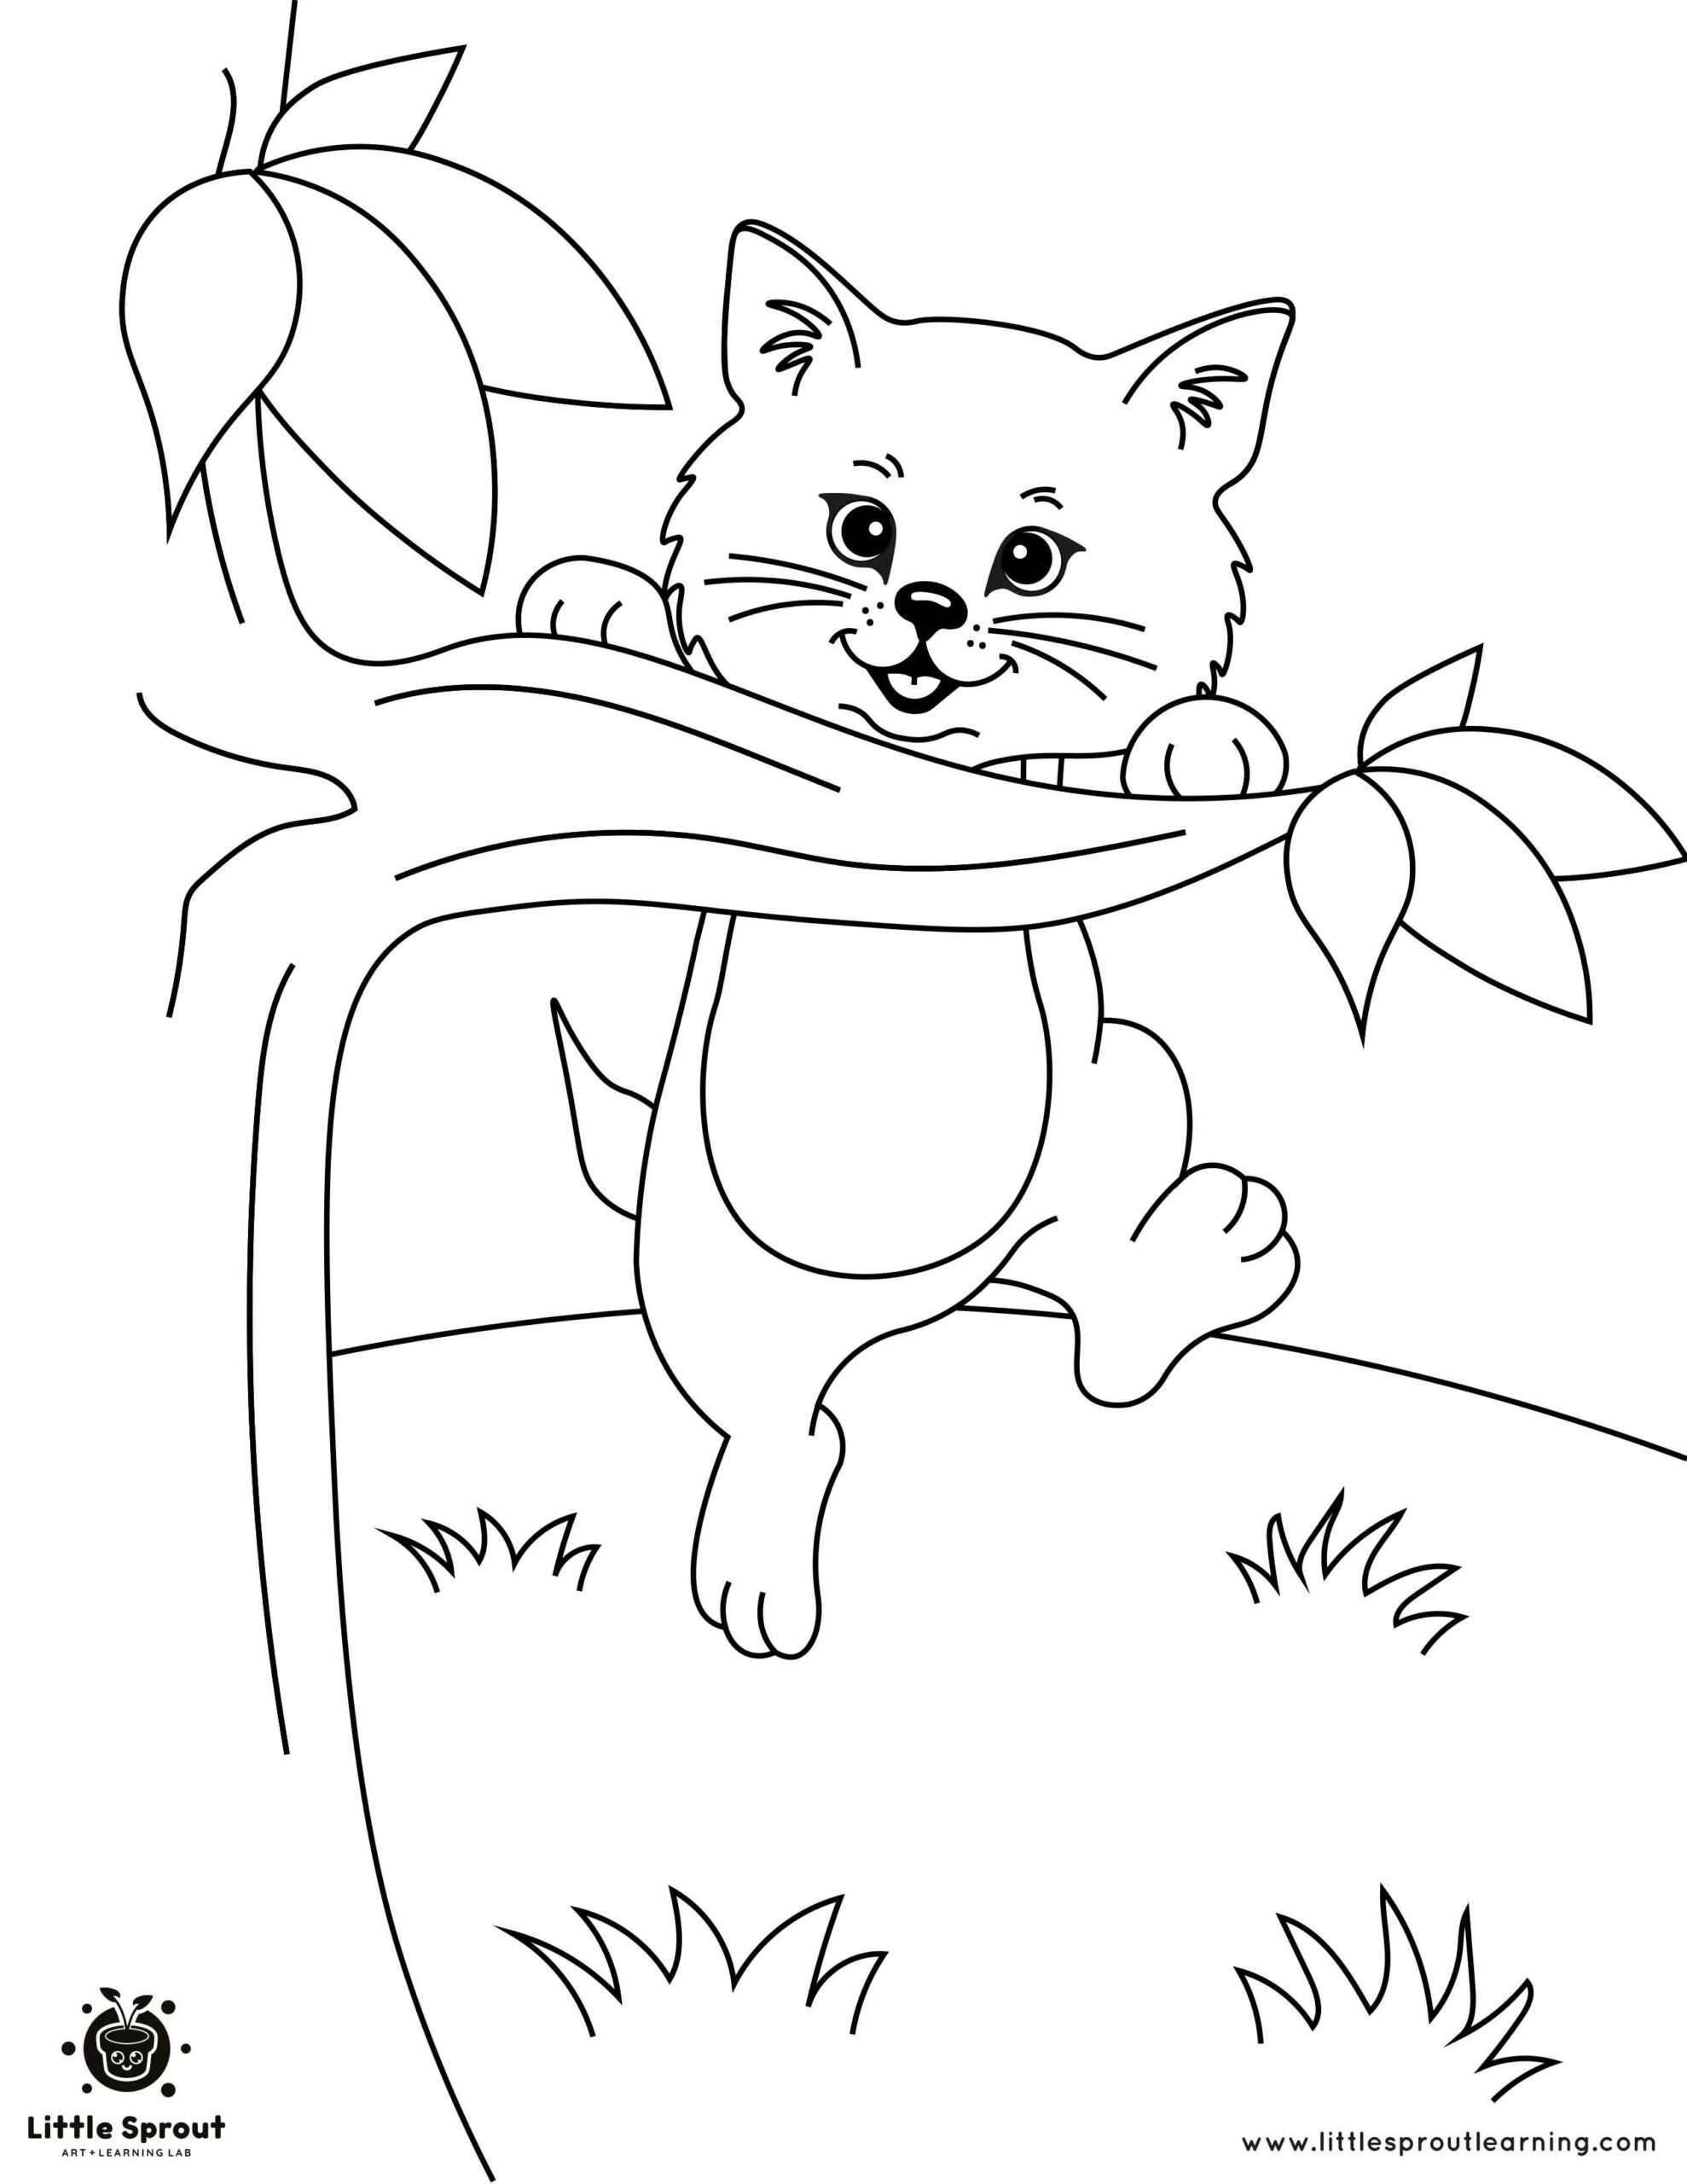 Coloring Page Cat 1 Little Sprout Learning scaled